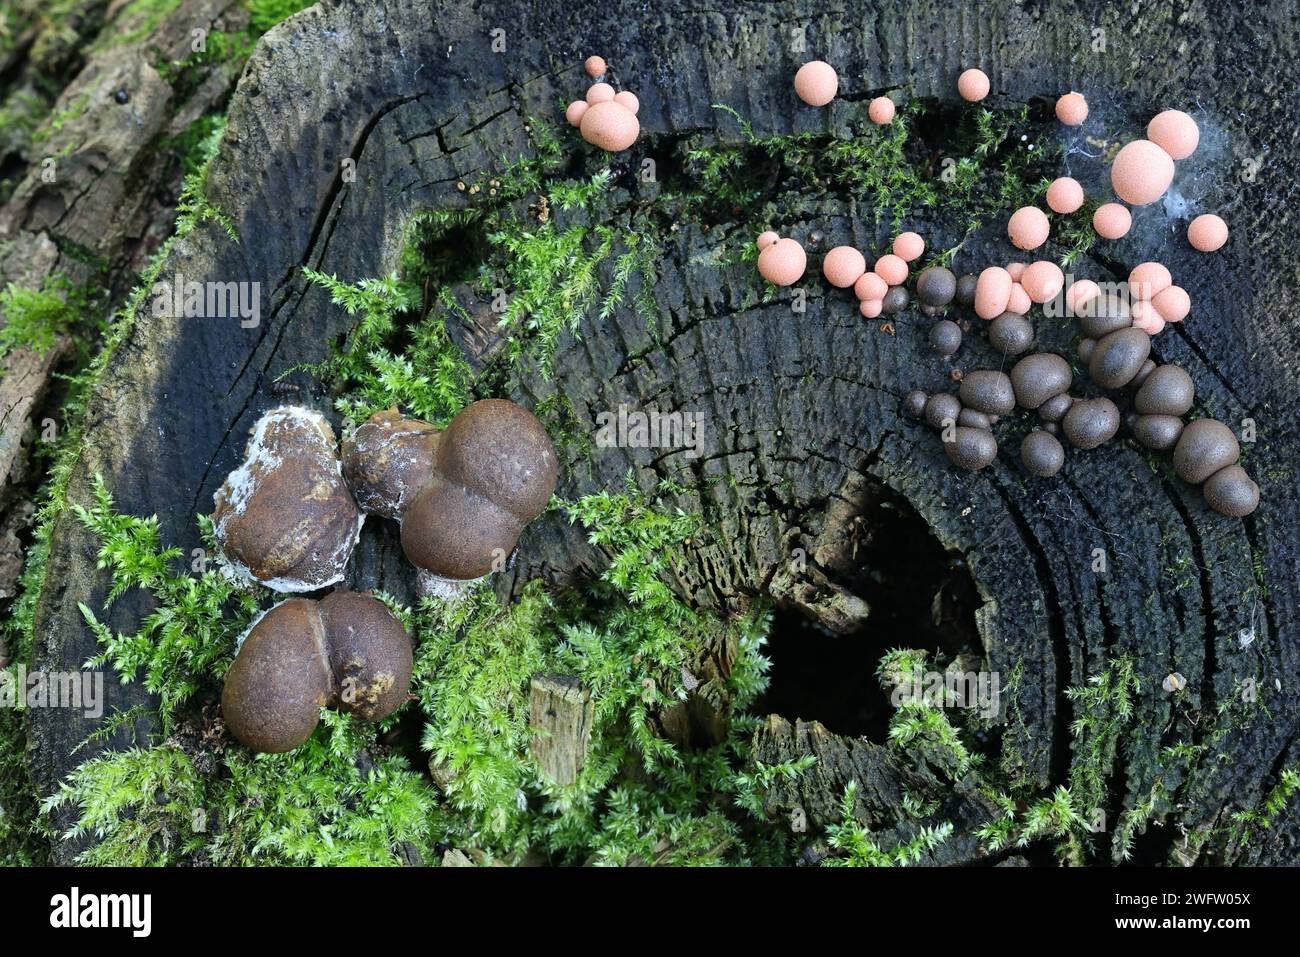 Lycogala epidendrum, commonly known as wolf's milk, and bigger Lycogala flavofuscum, slime molds from Finland Stock Photo